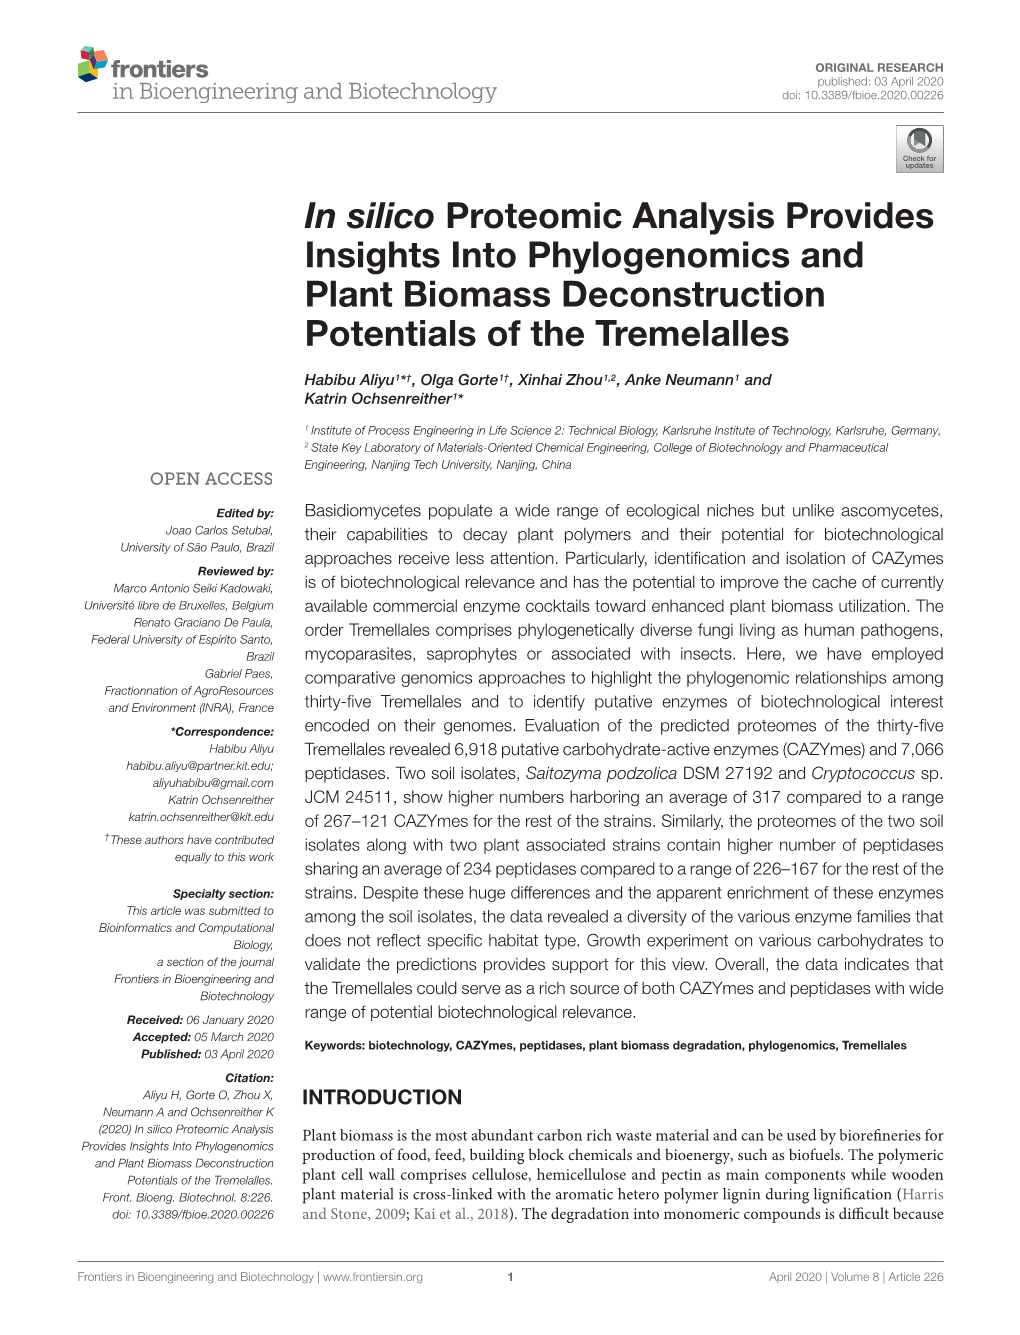 In Silico Proteomic Analysis Provides Insights Into Phylogenomics and Plant Biomass Deconstruction Potentials of the Tremelalles